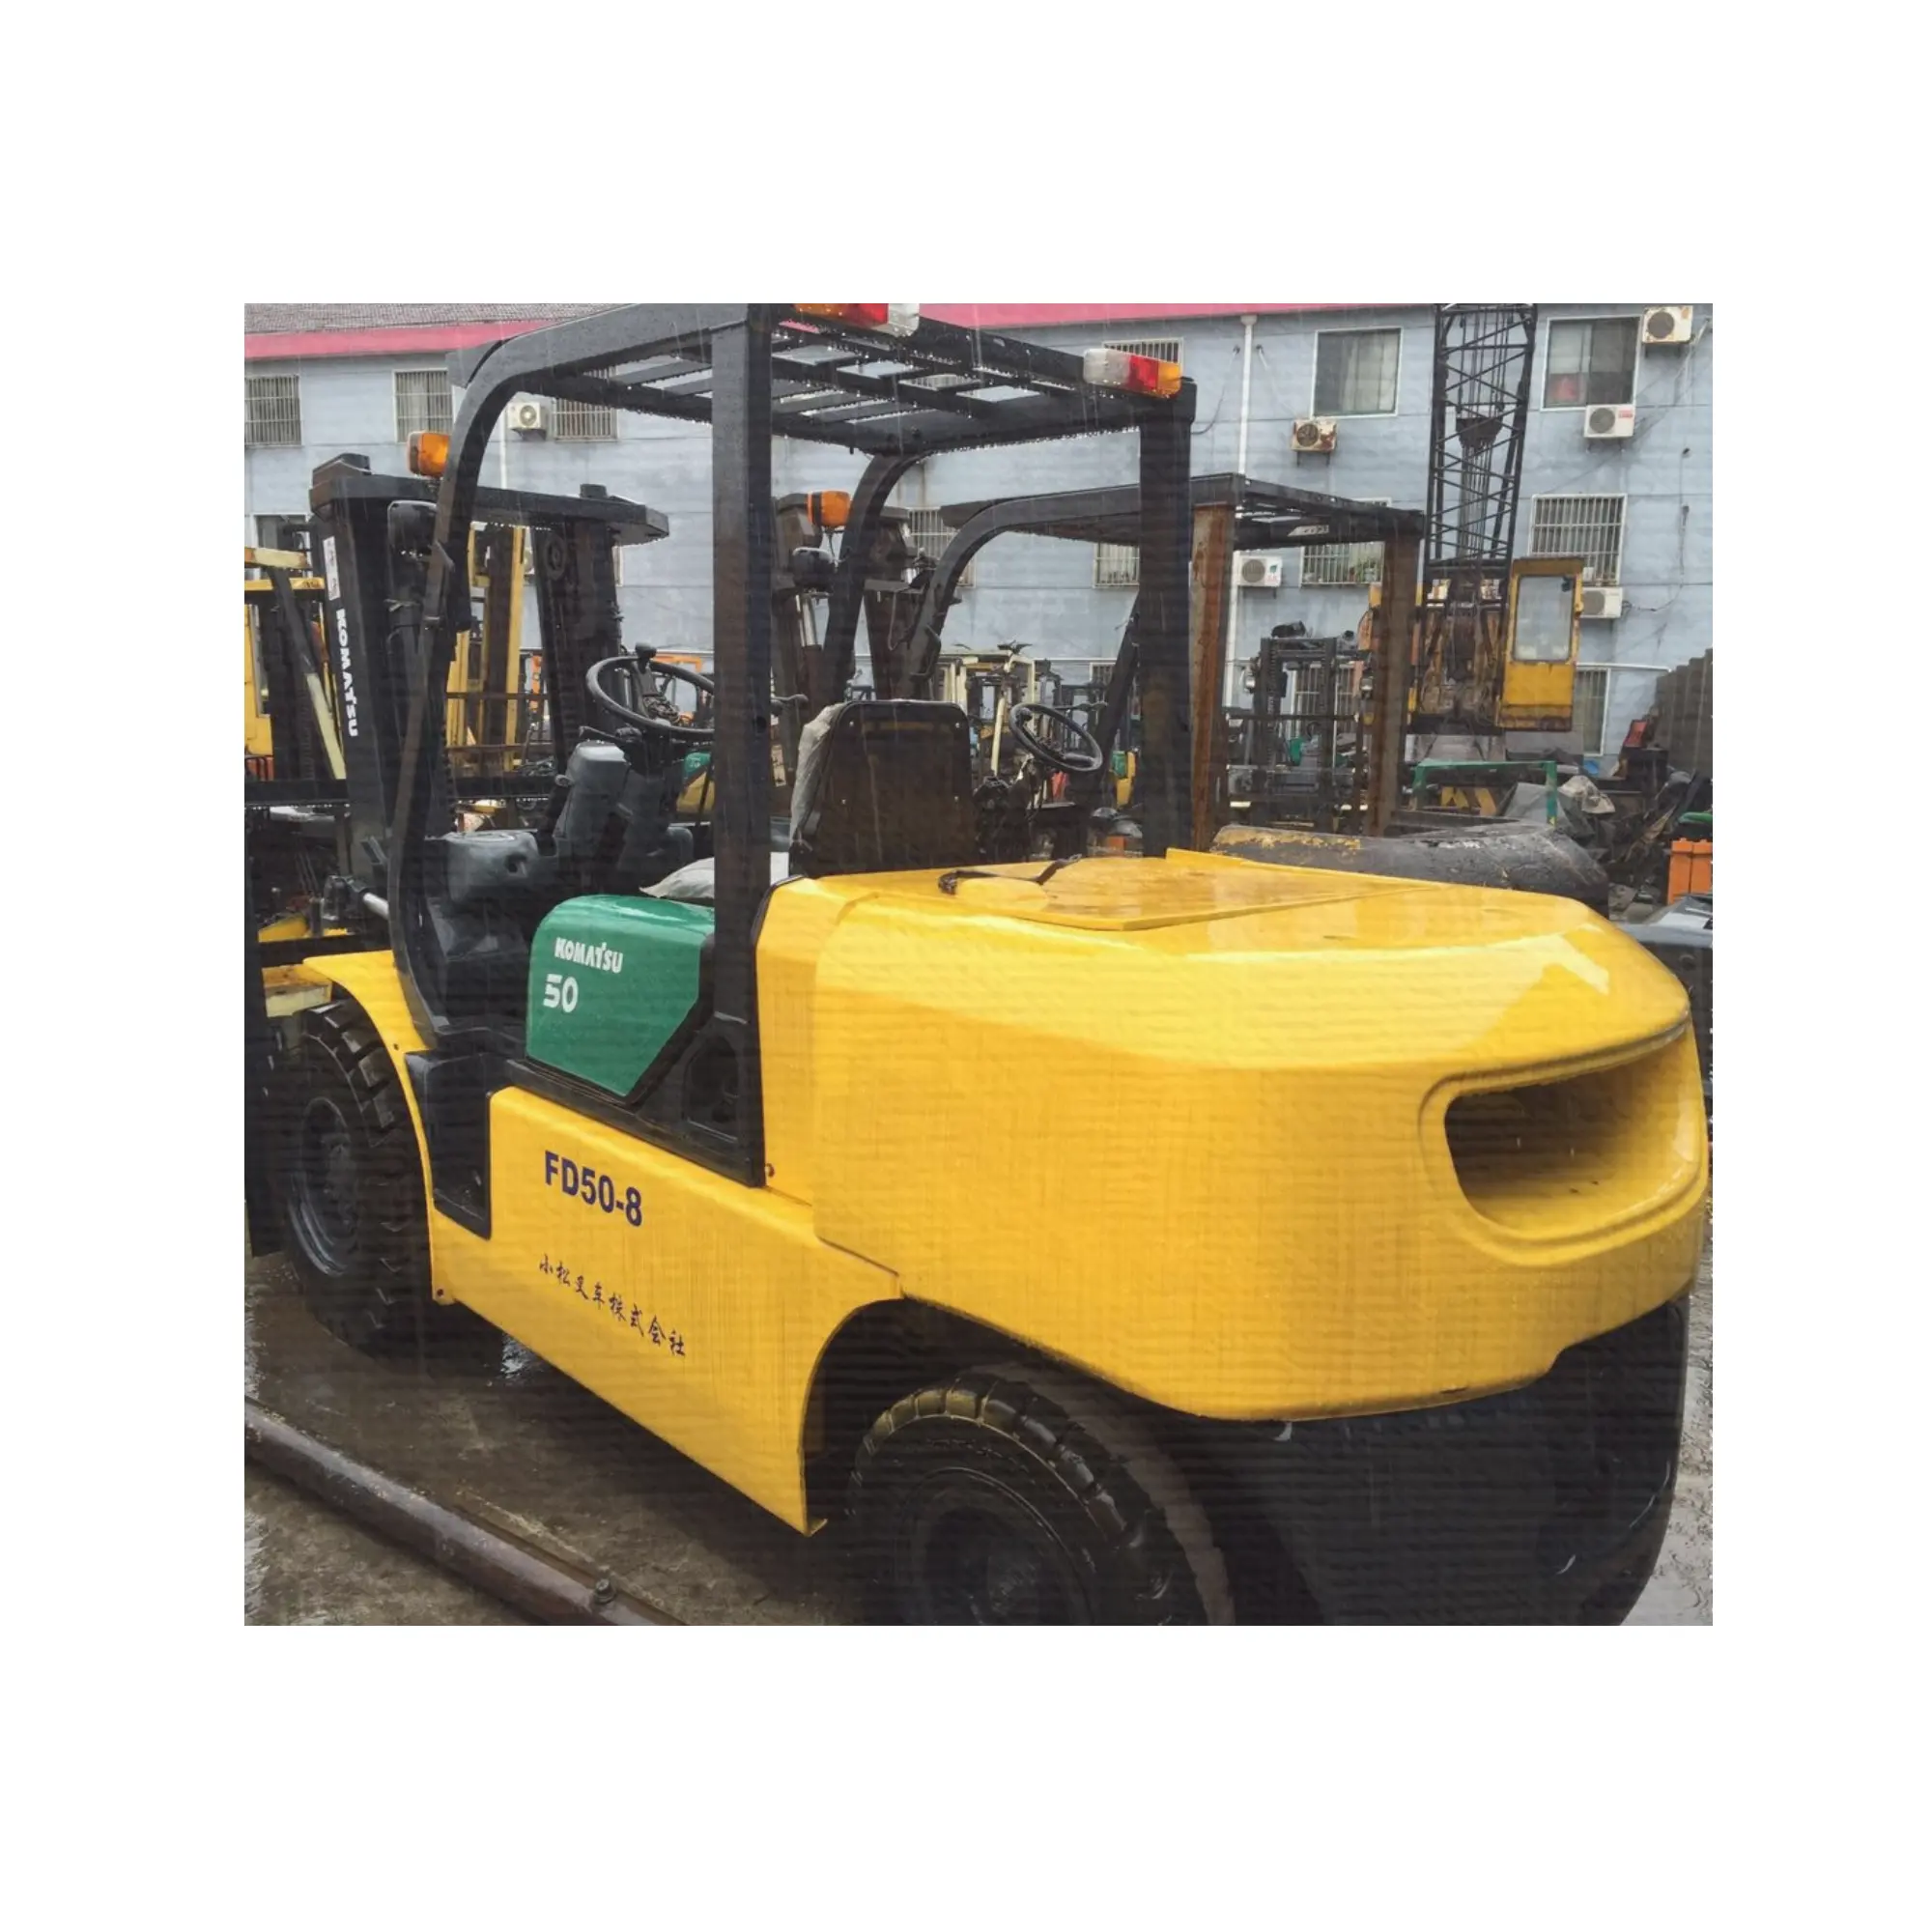 2ton 2 5ton 3ton 3m 4 5m 5m 6m Diesel Forklift Italy Isuzu Marketing Motor Germany Power Building Engine Truck used forklifts